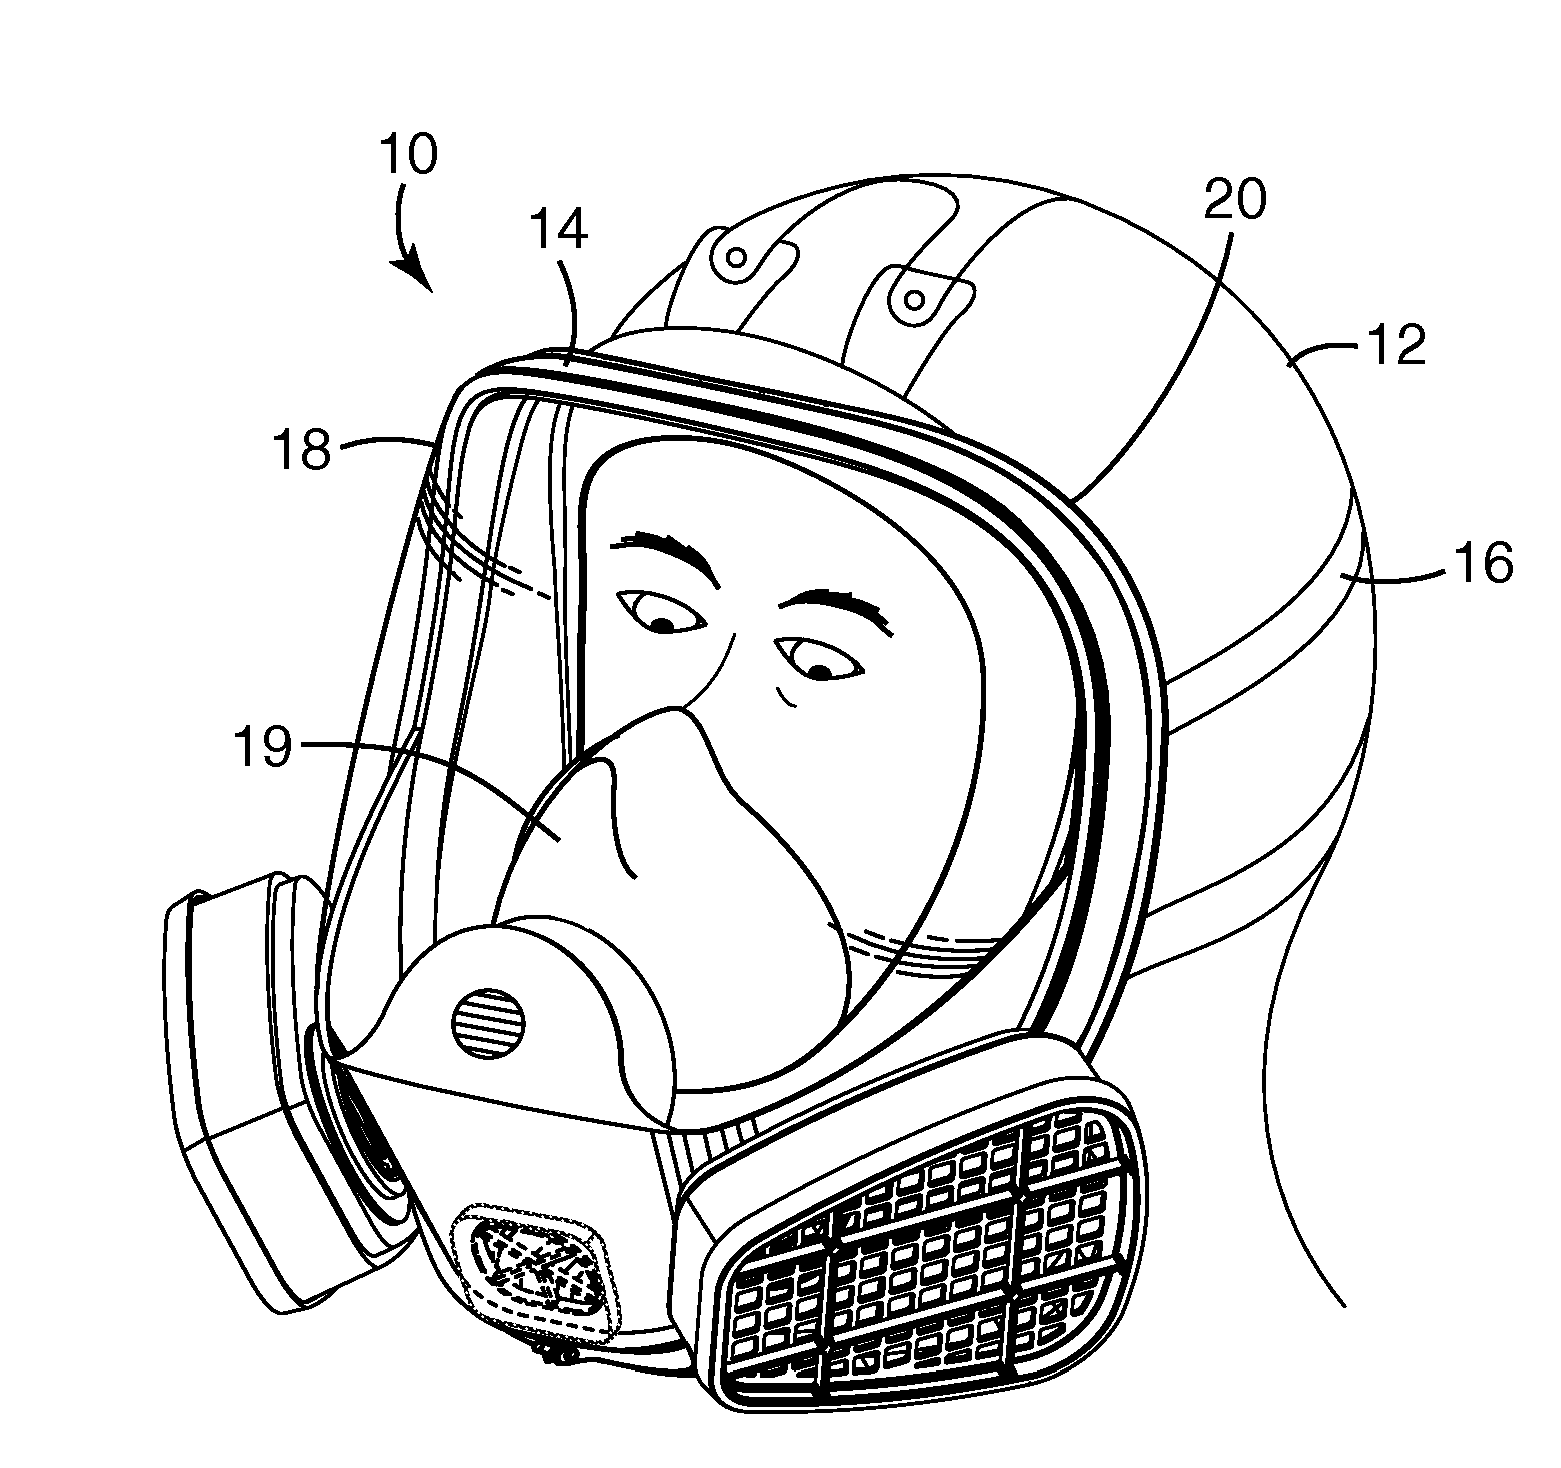 Respiratory protection device